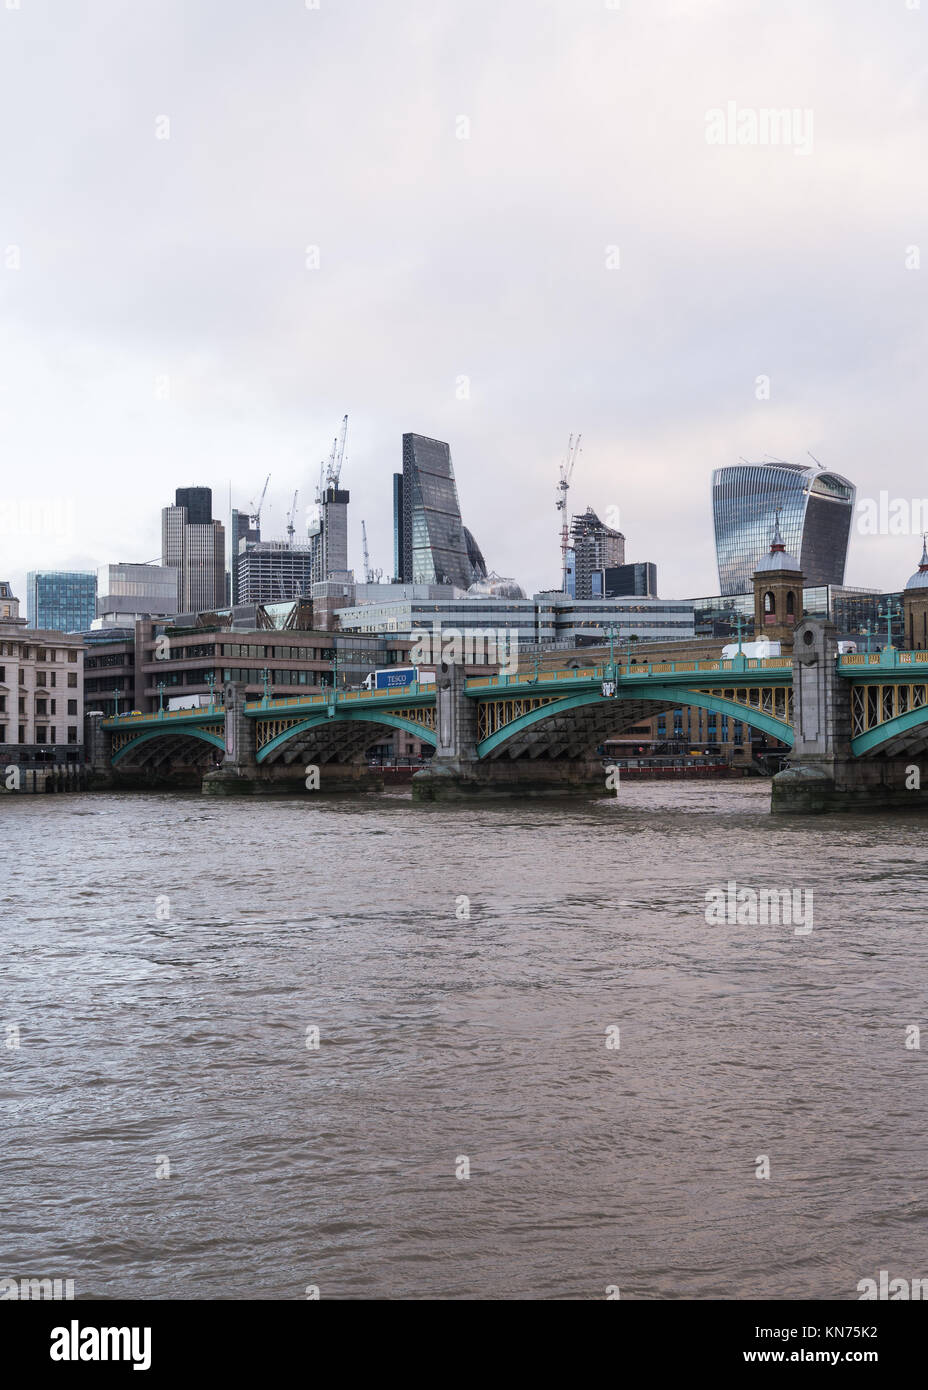 Easterly view across the River Thames of the City of London and Southwark bridge, as seen from the Millenium Bridge, London, England, UK. Stock Photo